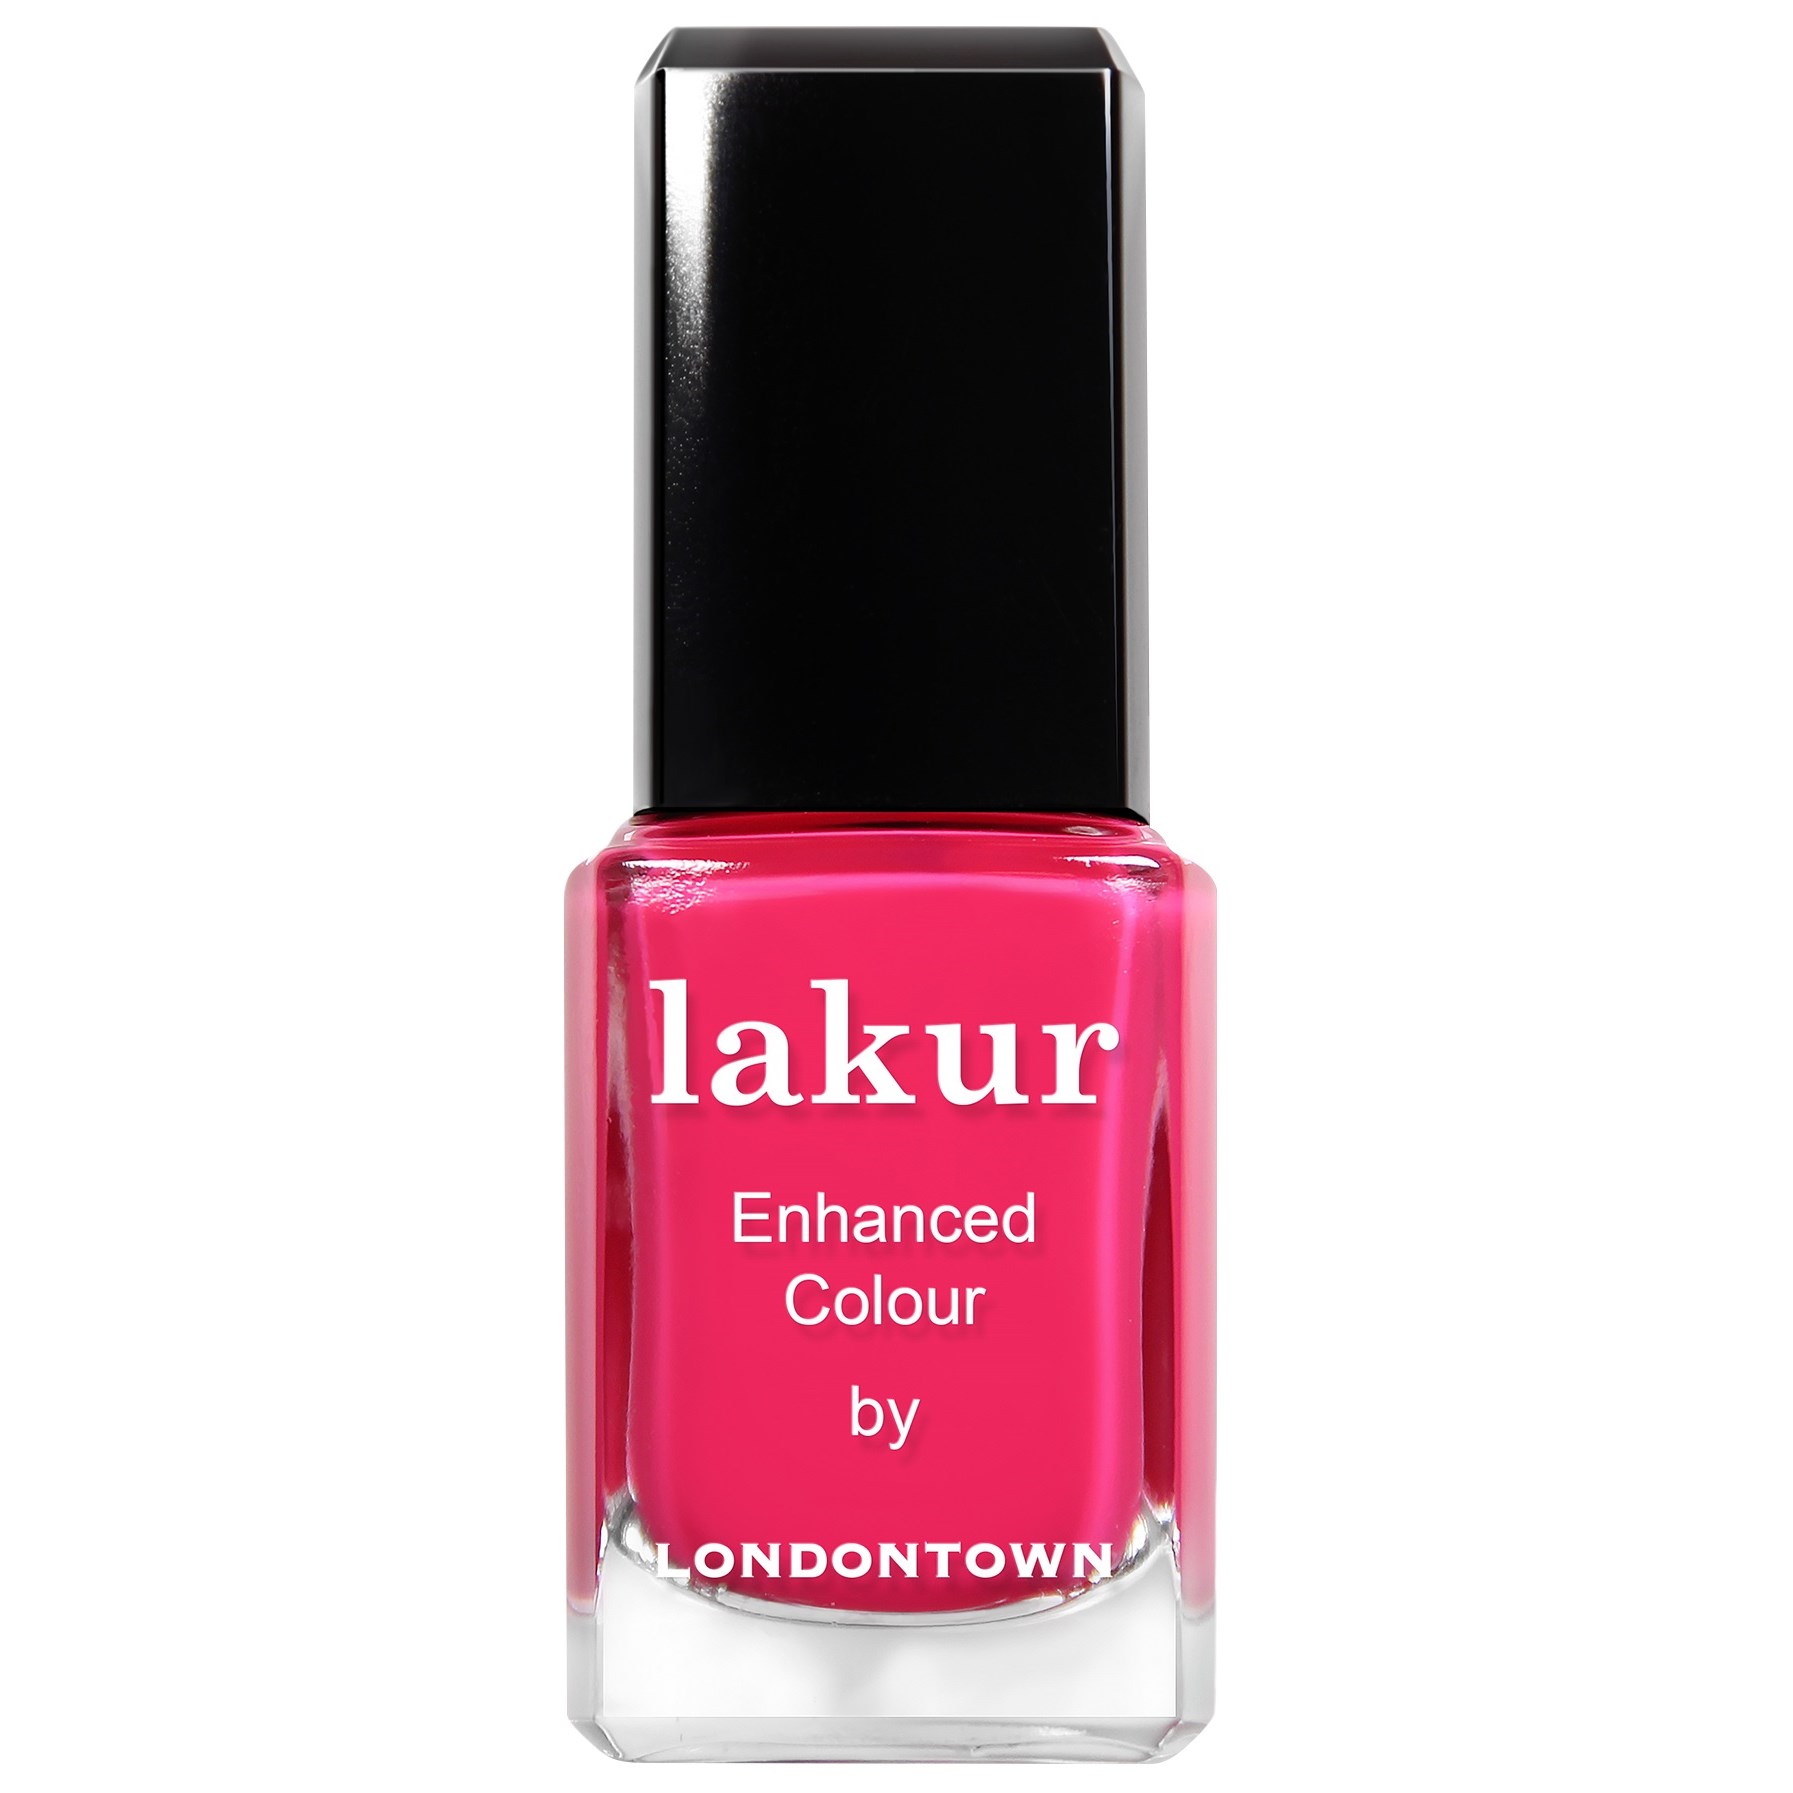 LONDONTOWN Nail Lakur Queen of Hearts